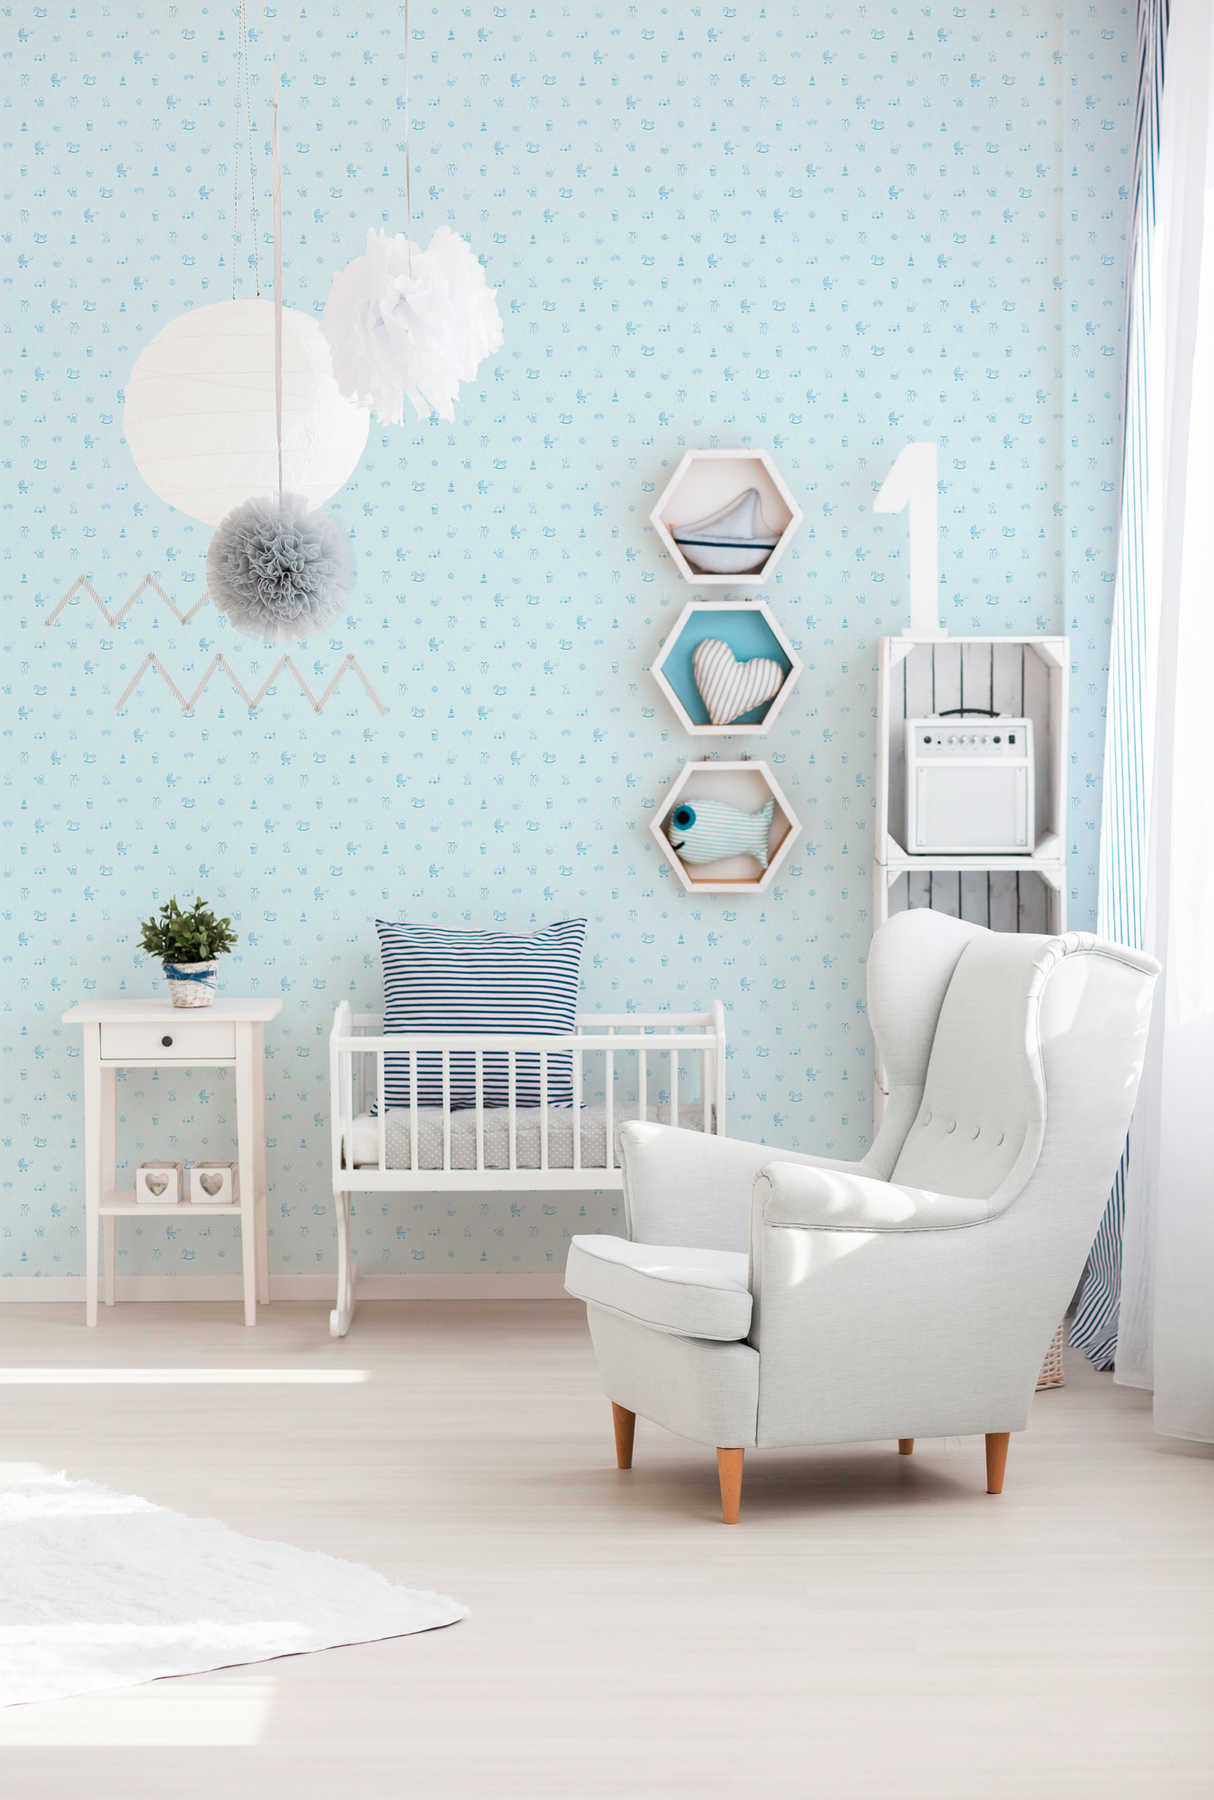             Baby room wallpaper for boys with motif pattern - blue
        